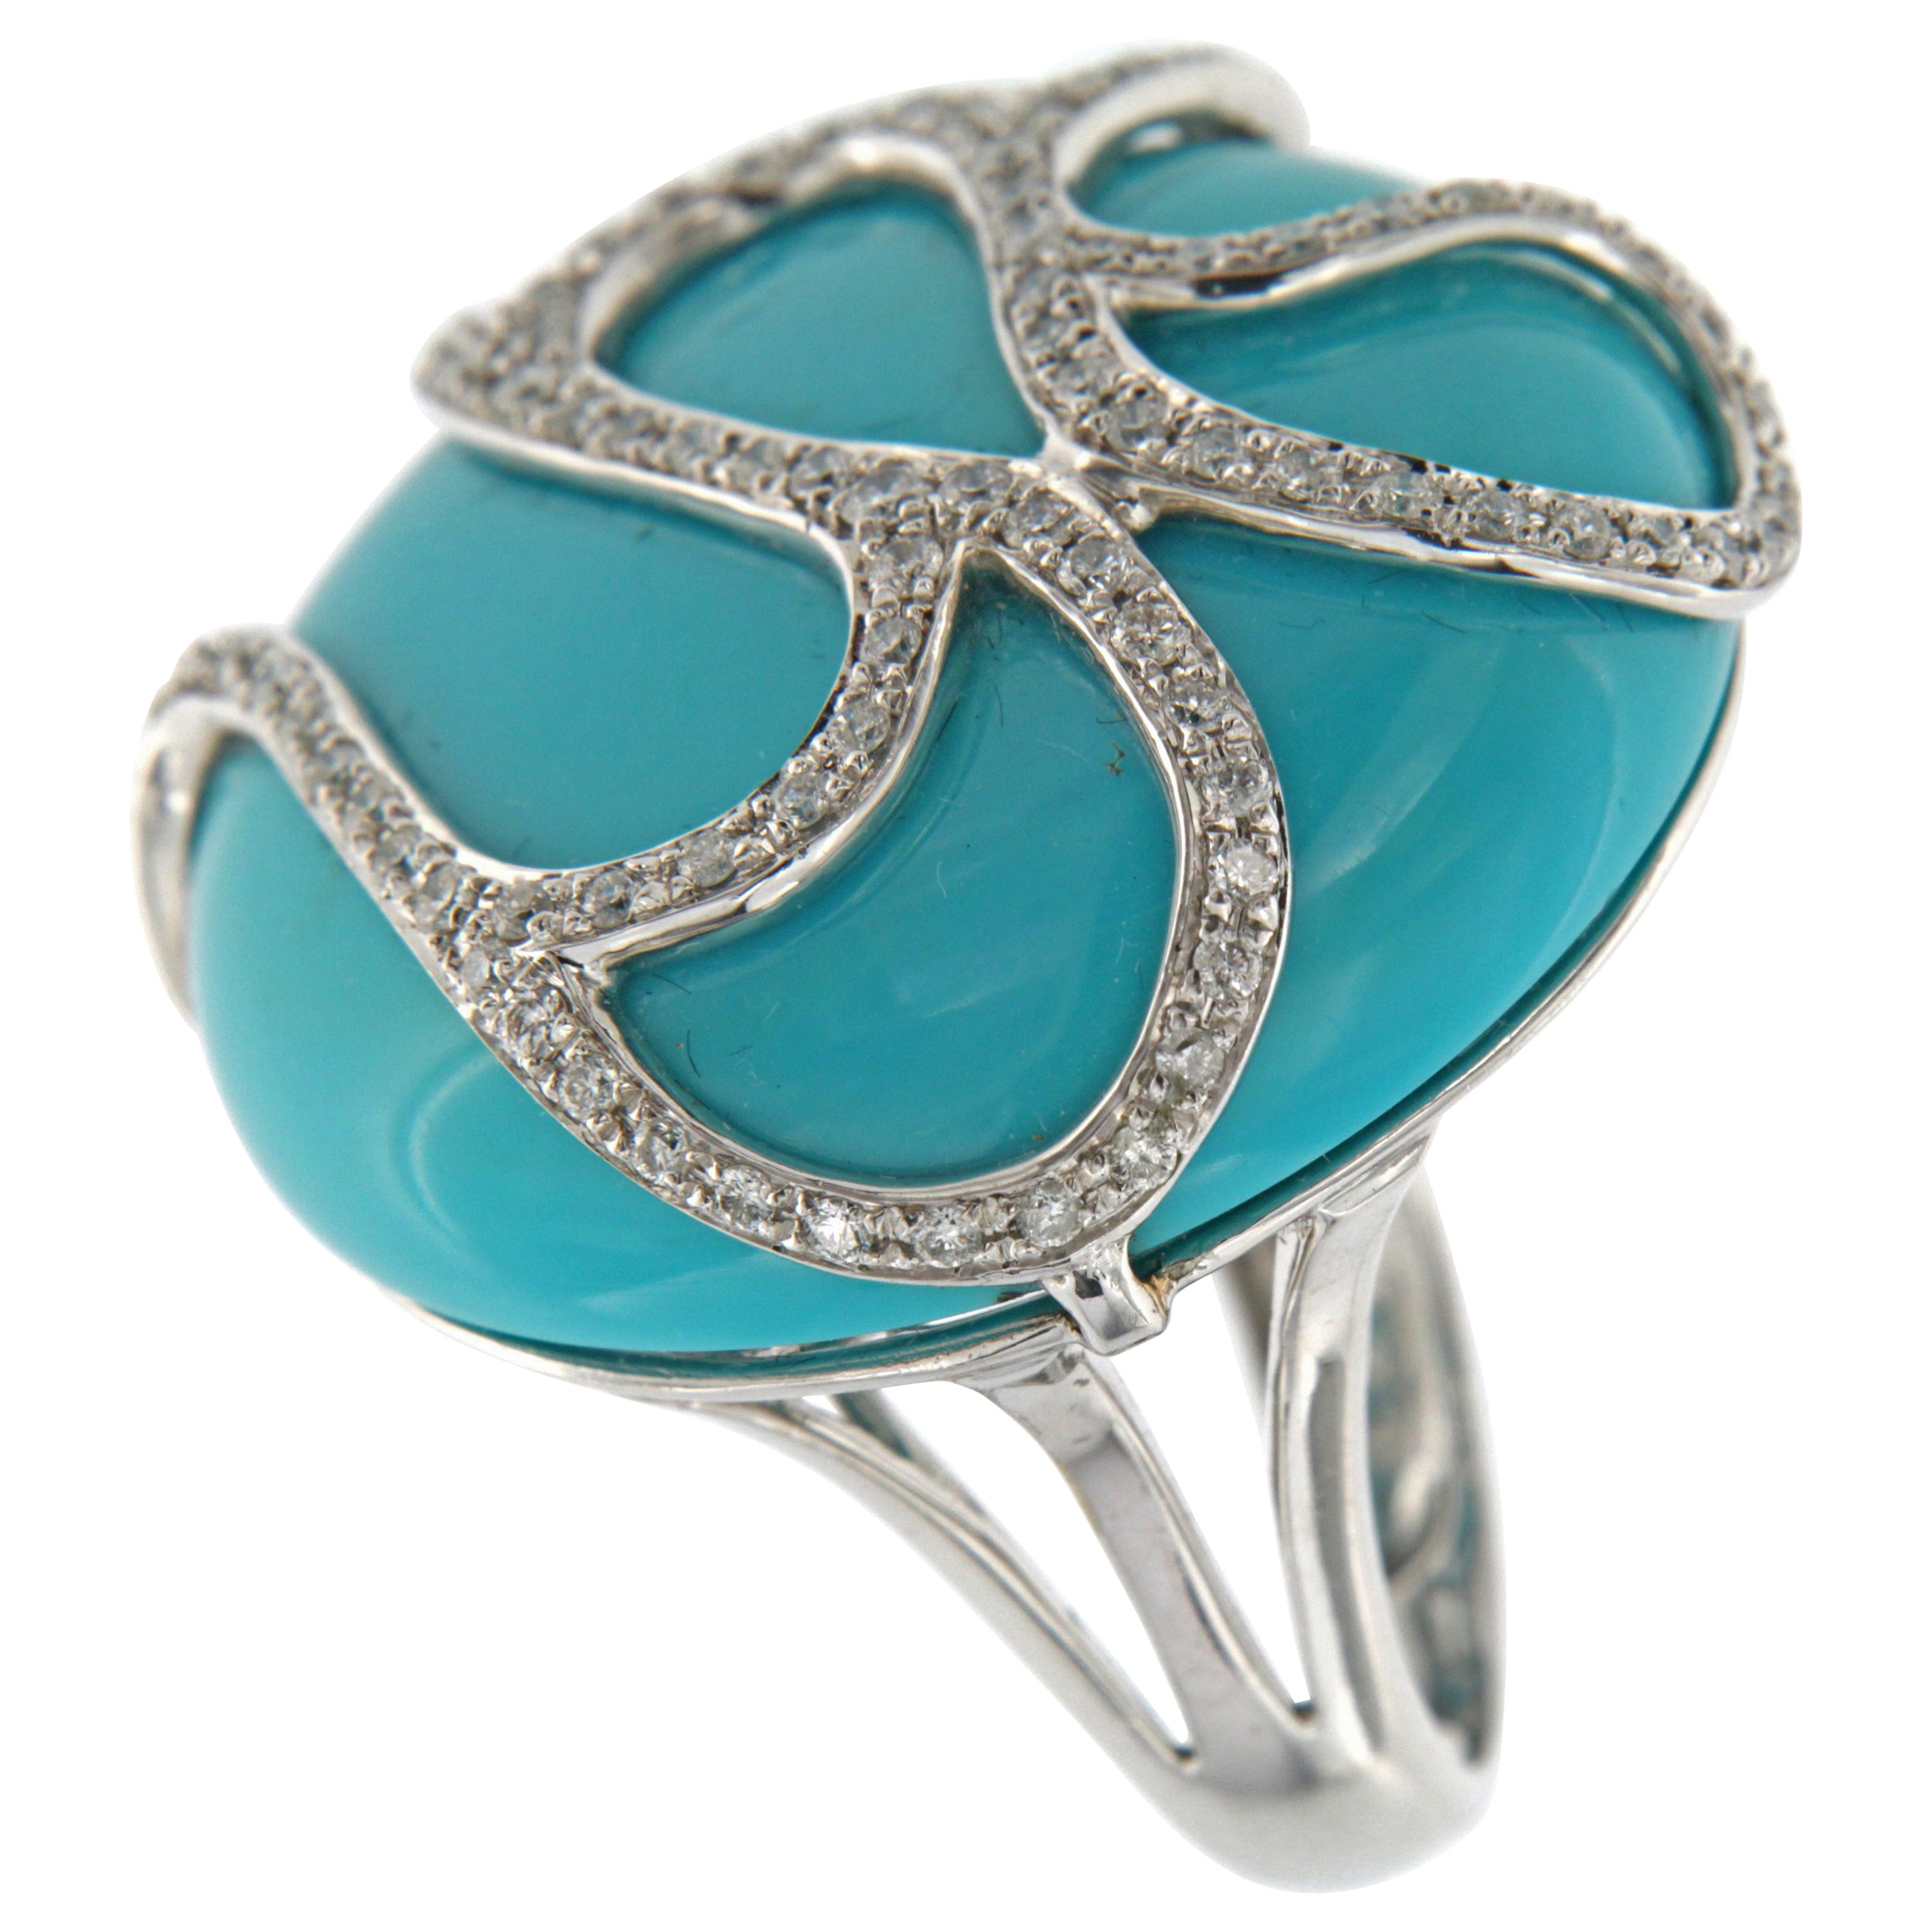 55.85Ct Huge Sleeping Beauty Turquoise Ring with Diamonds in 14K White Gold For Sale